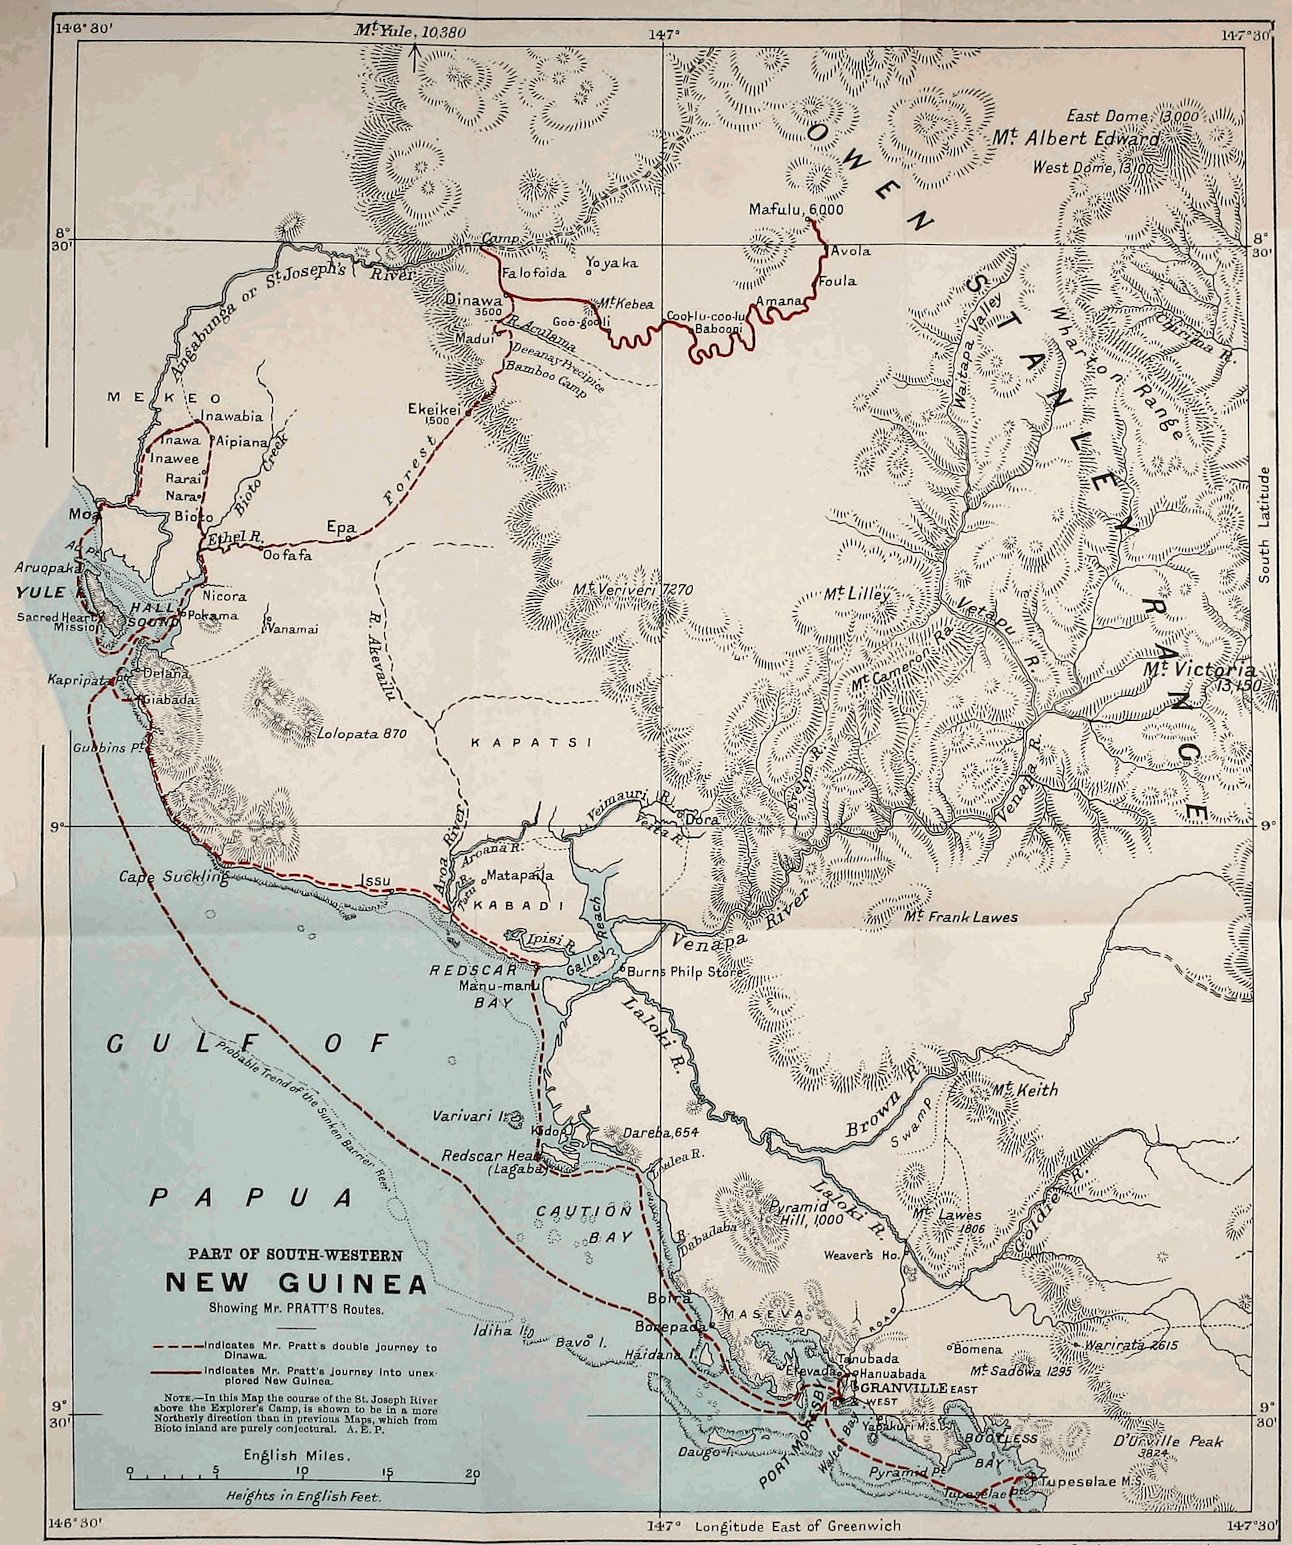 PART OF SOUTH-WESTERN NEW GUINEA Showing Mr. PRATT’S Routes.